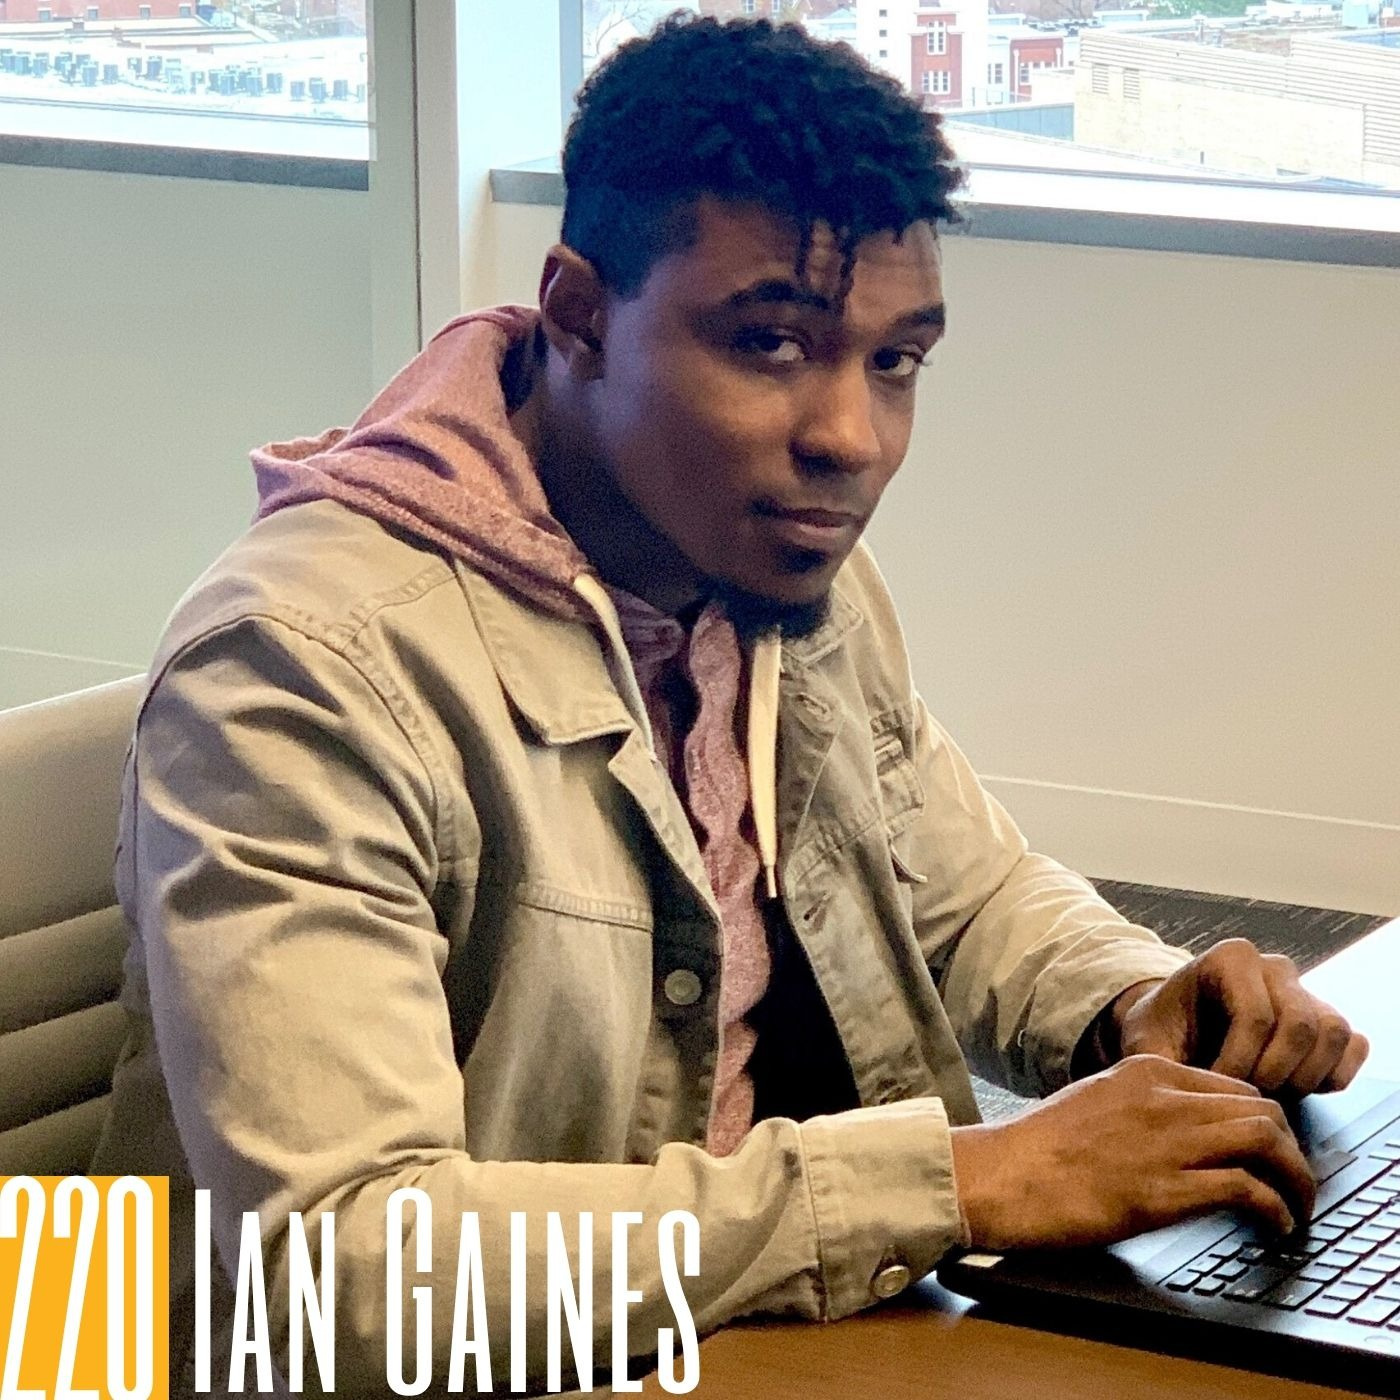 220 Ian Gaines - A Voice for Immigration